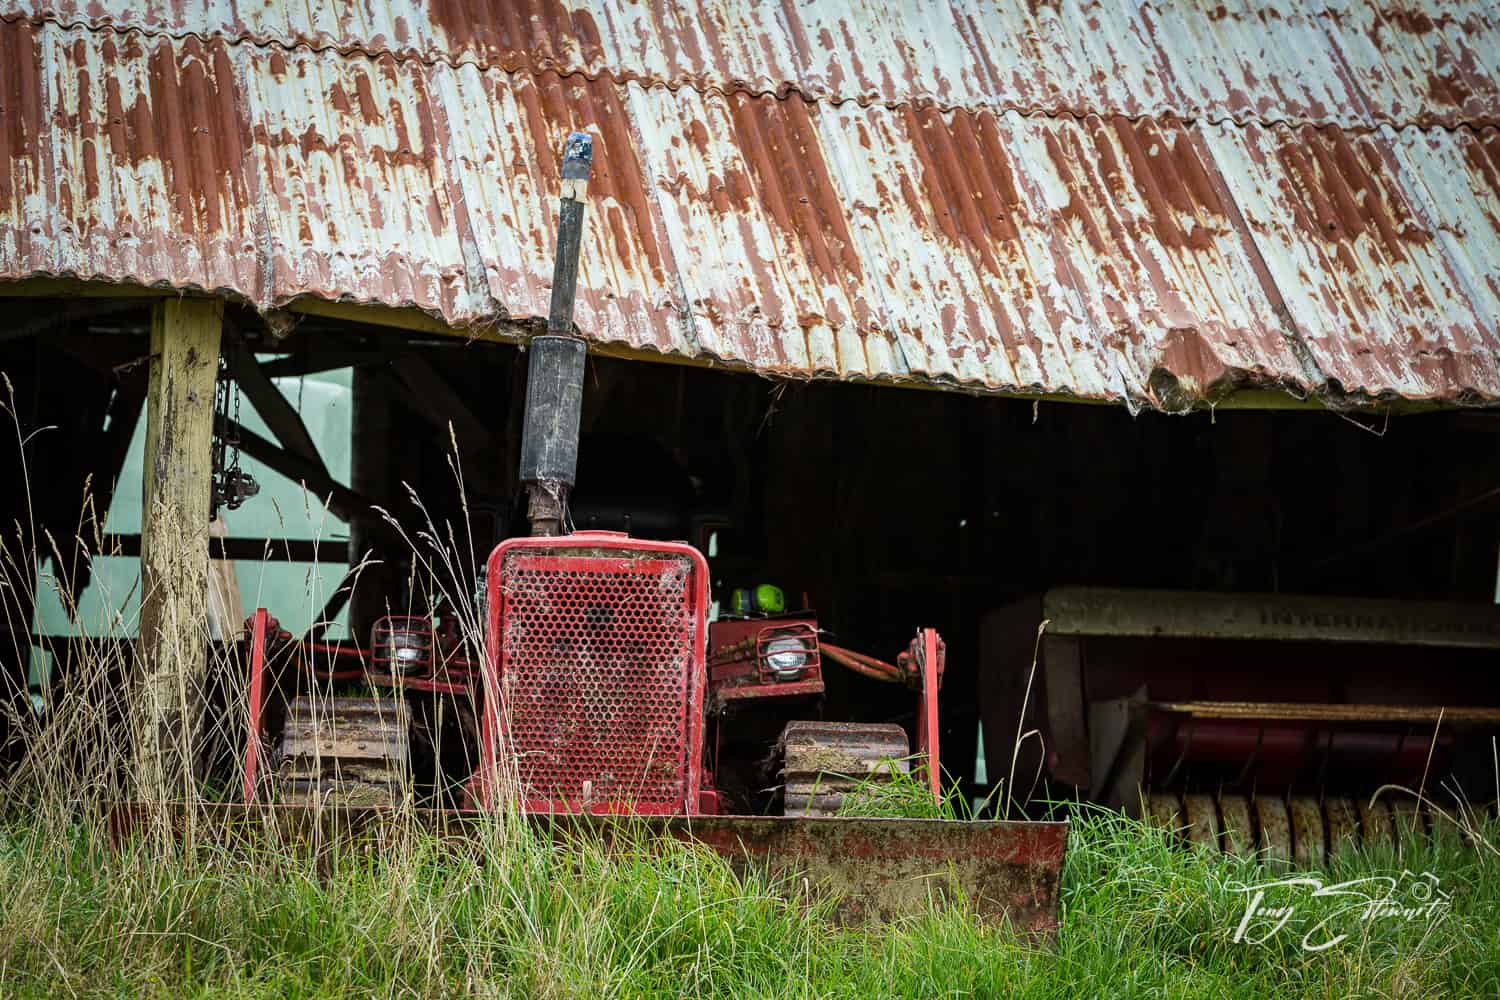 Old tractor in shed Catlins.